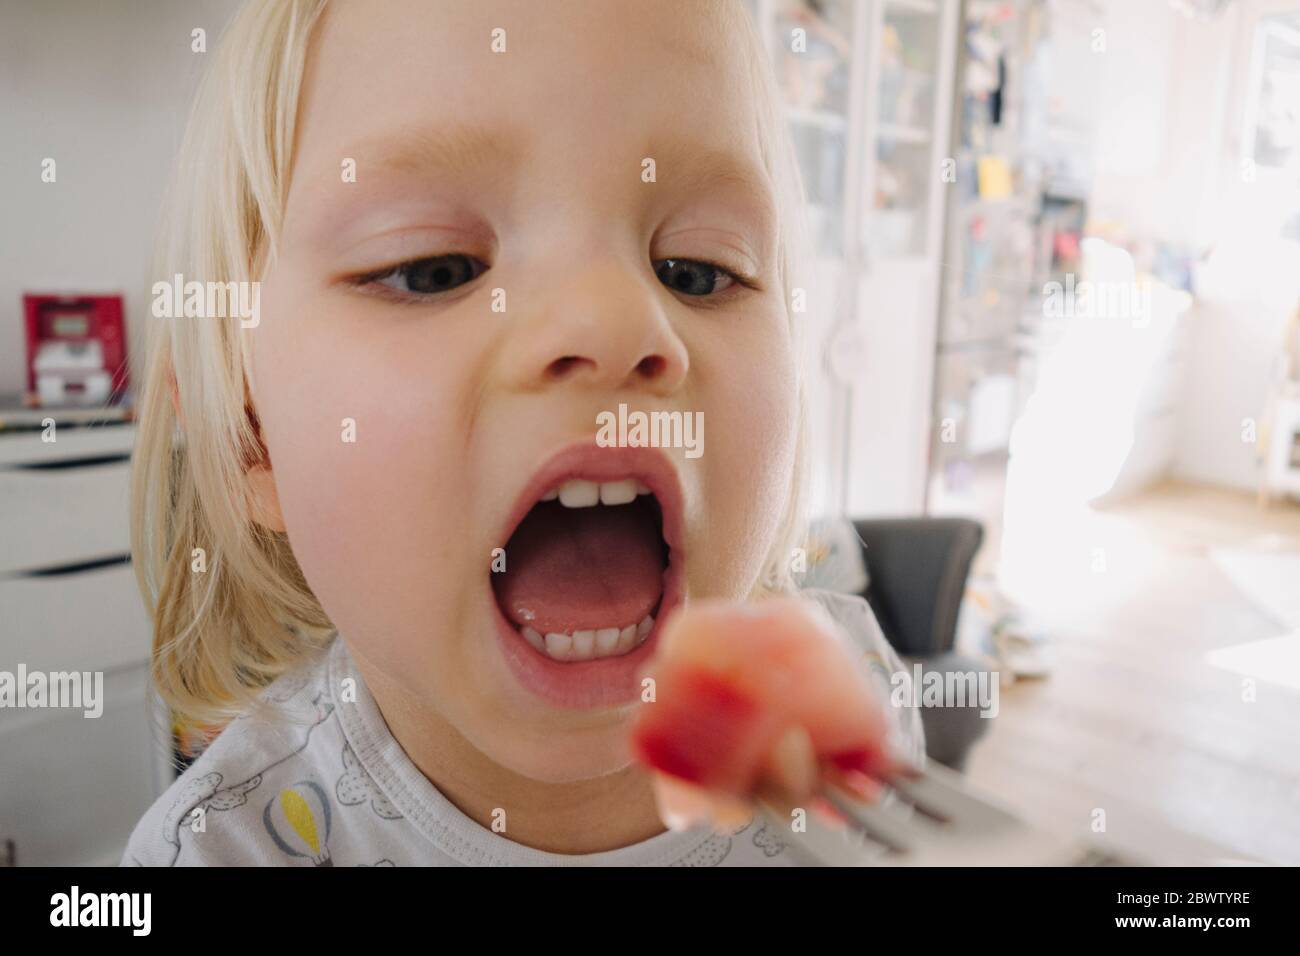 Portrait of blond little girl with open mouth Stock Photo